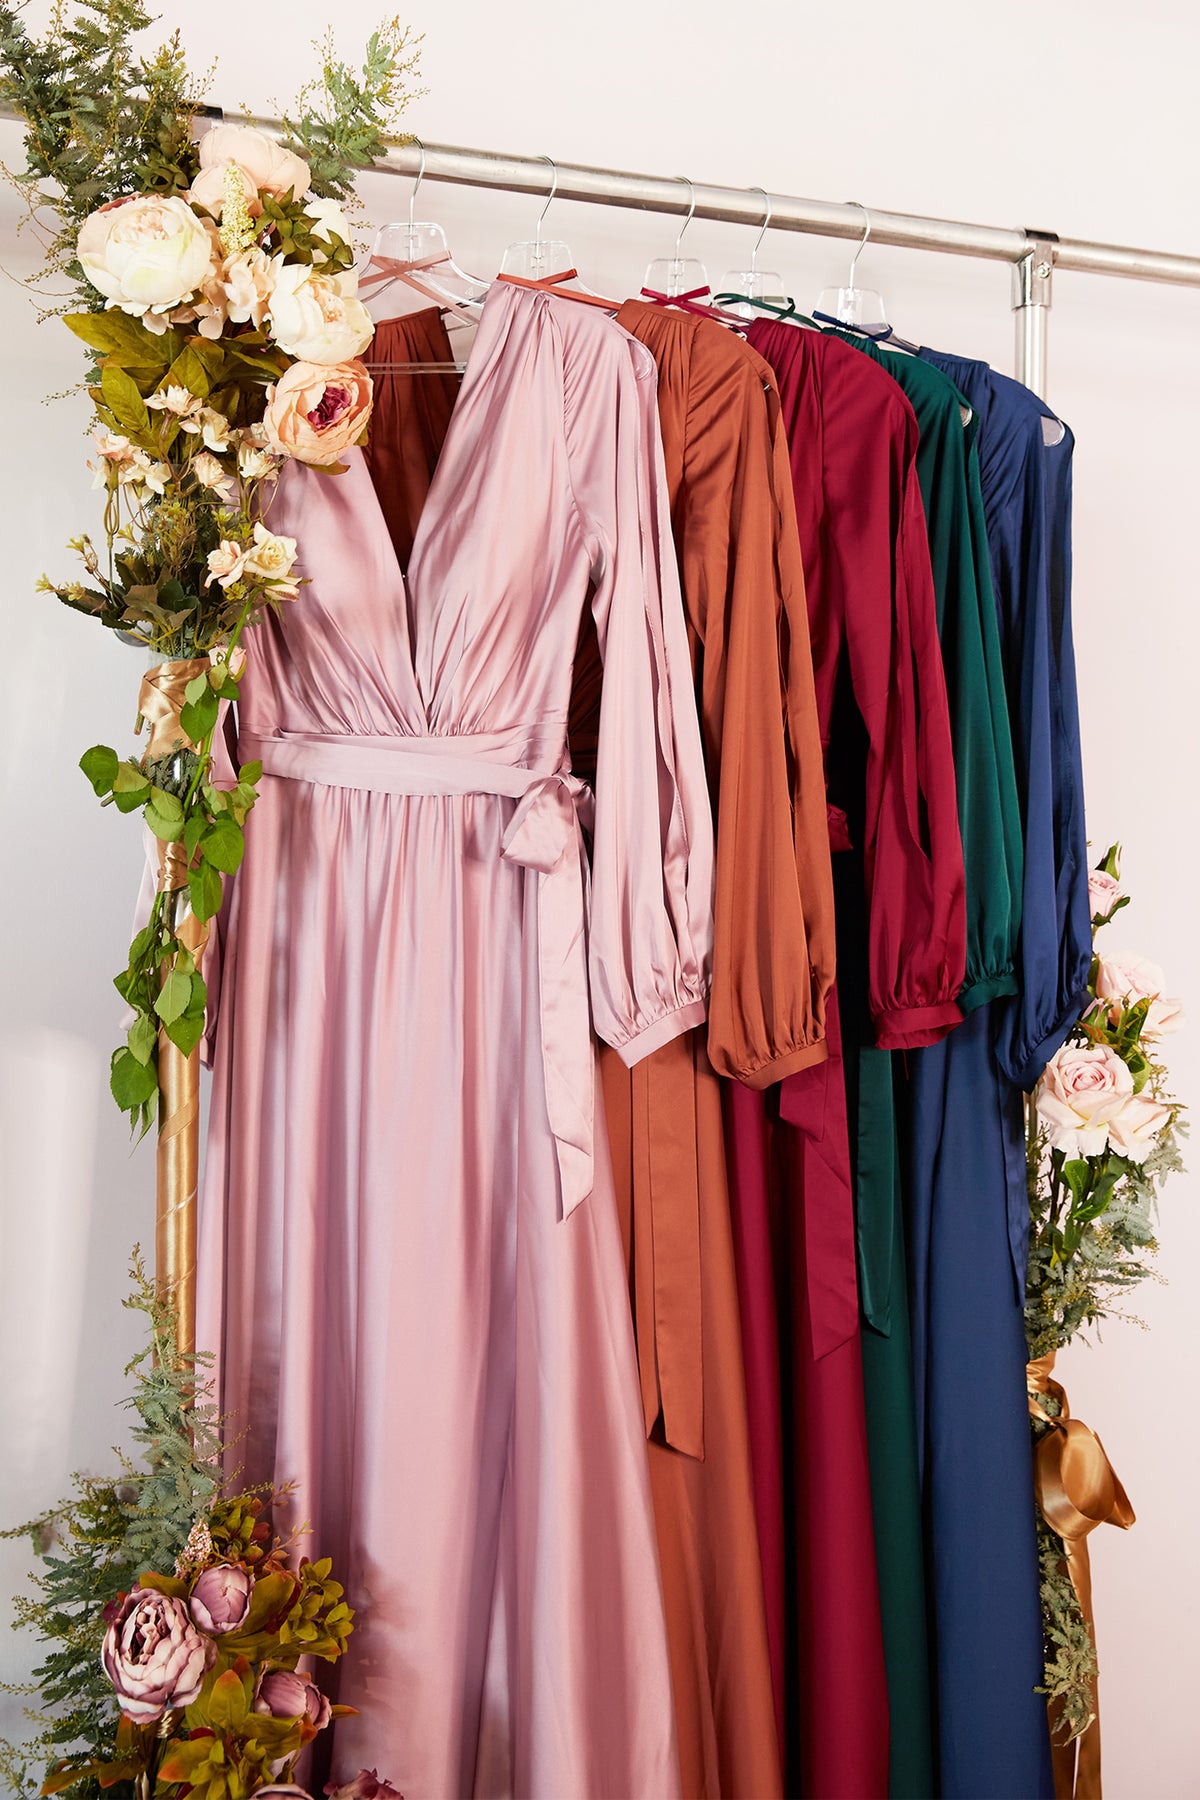 How To Hang Long Dresses